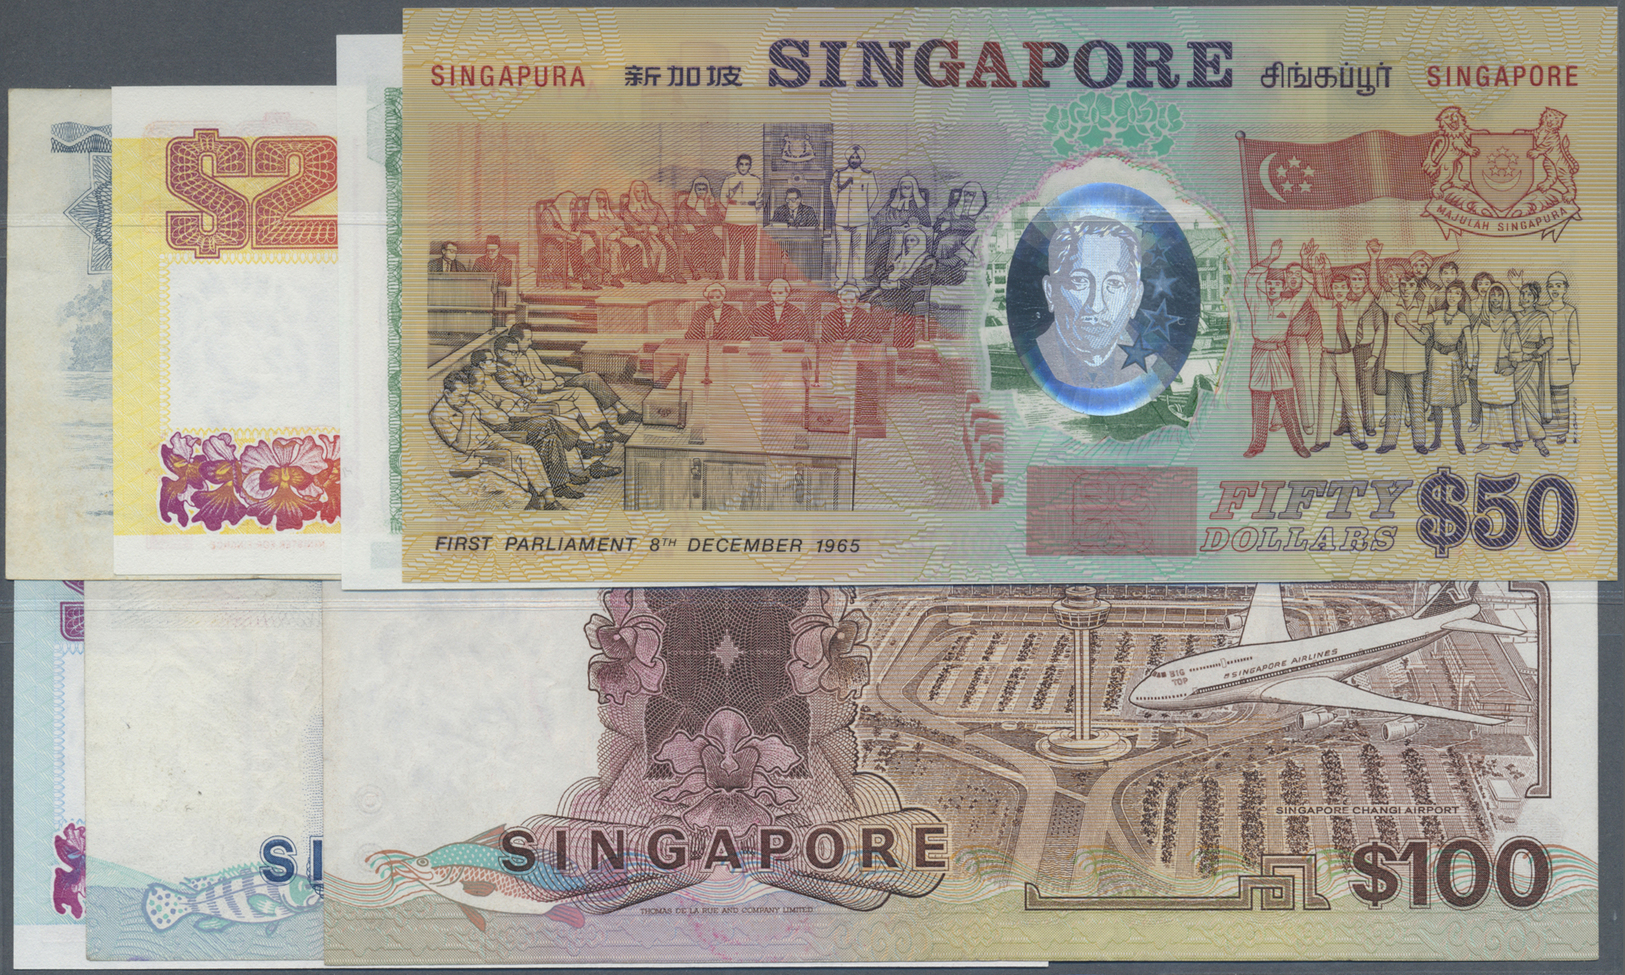 02909 Singapore / Singapur: Set Of 13 Mostly Different Banknotes Containing 50 Dollars Polymer 1990 (UNC), 1 Dollar Orch - Singapour